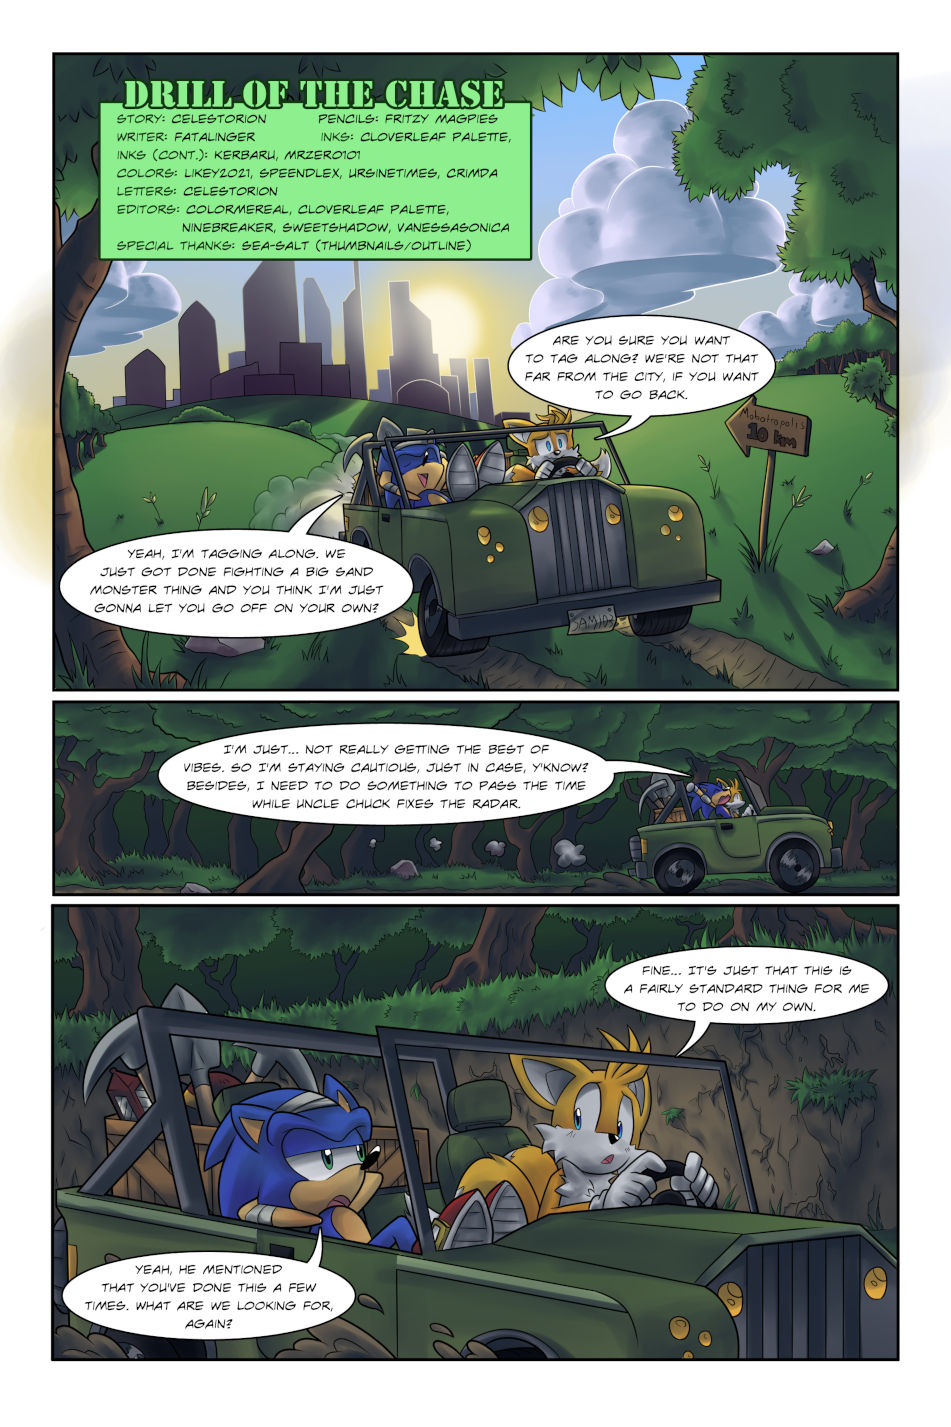 AndTails — Sonadow fans will enjoy the new IDW Sonic comic